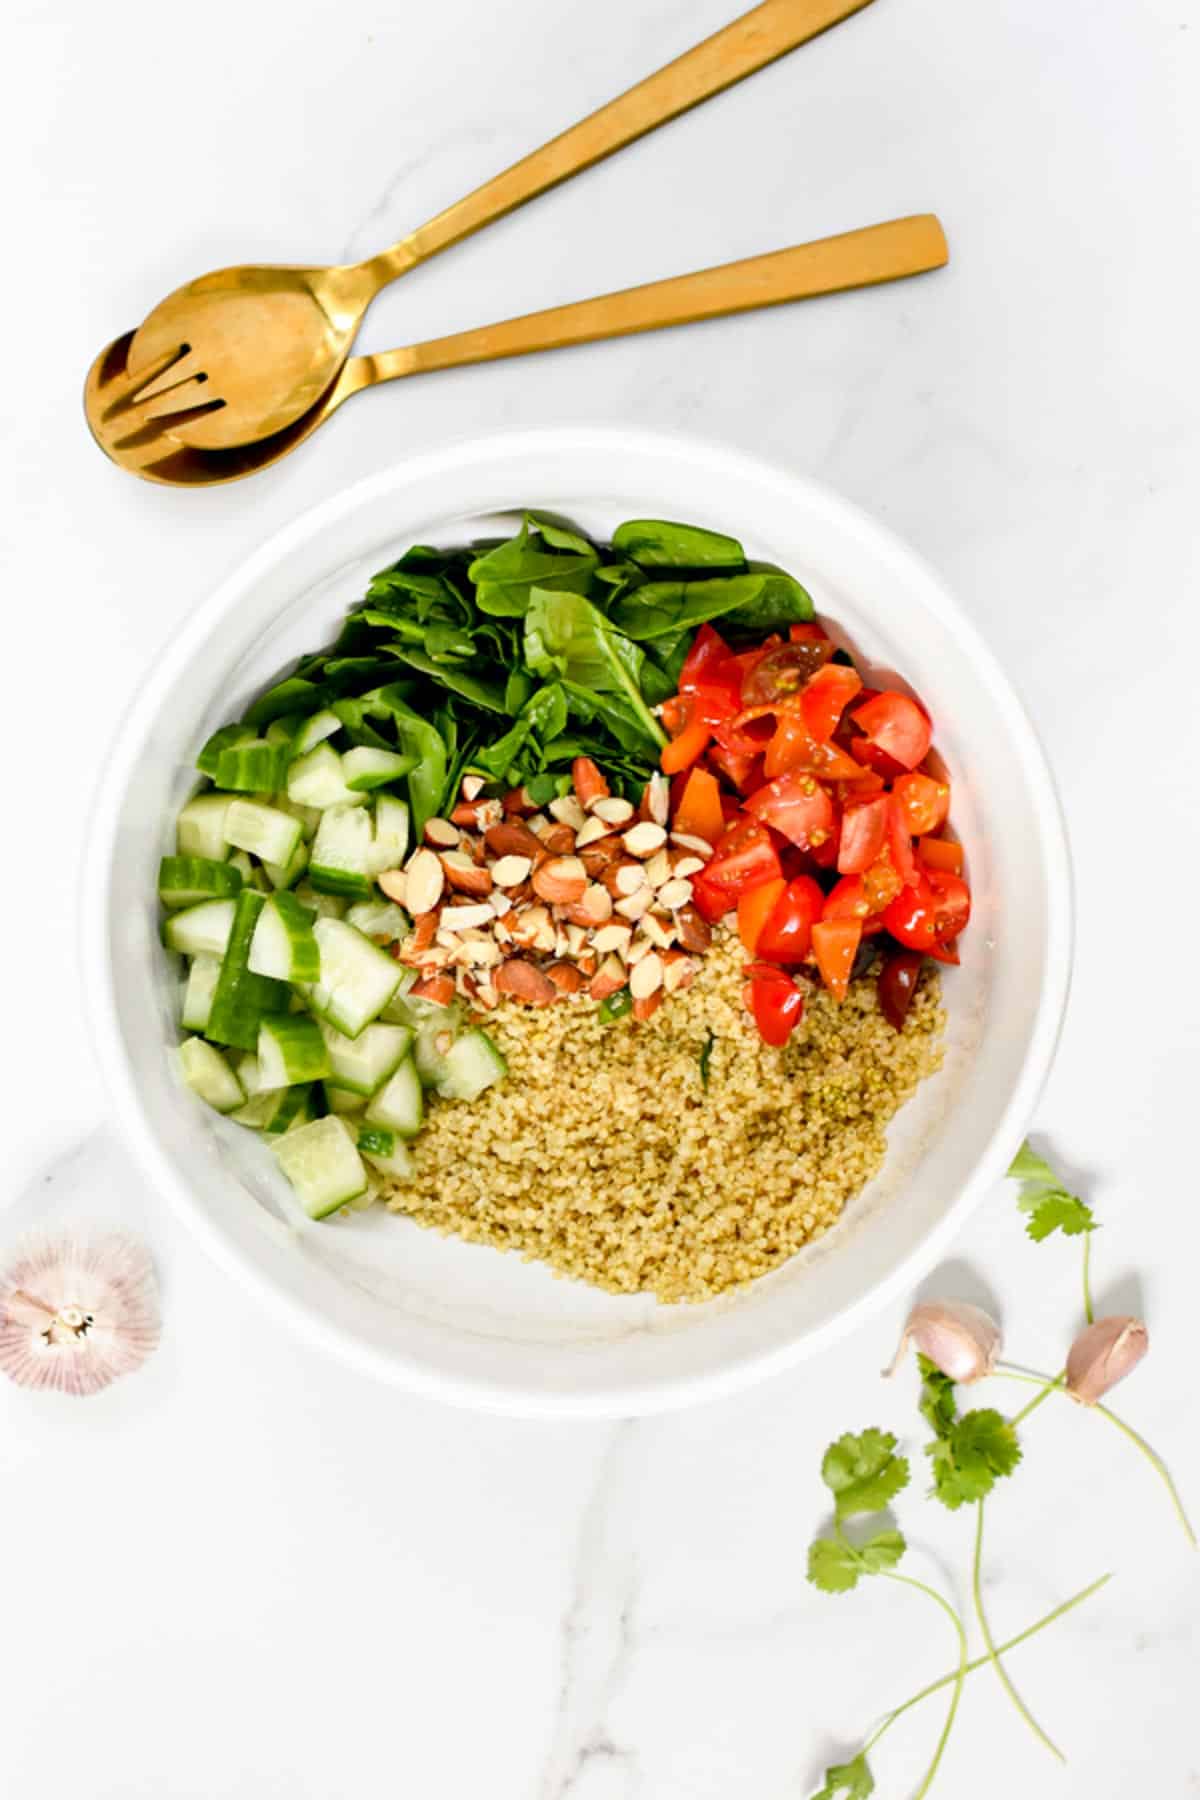 A healthy quinoa spinach salad with juicy tomatoes, crunchy almonds, and tangy lemon dressing. 